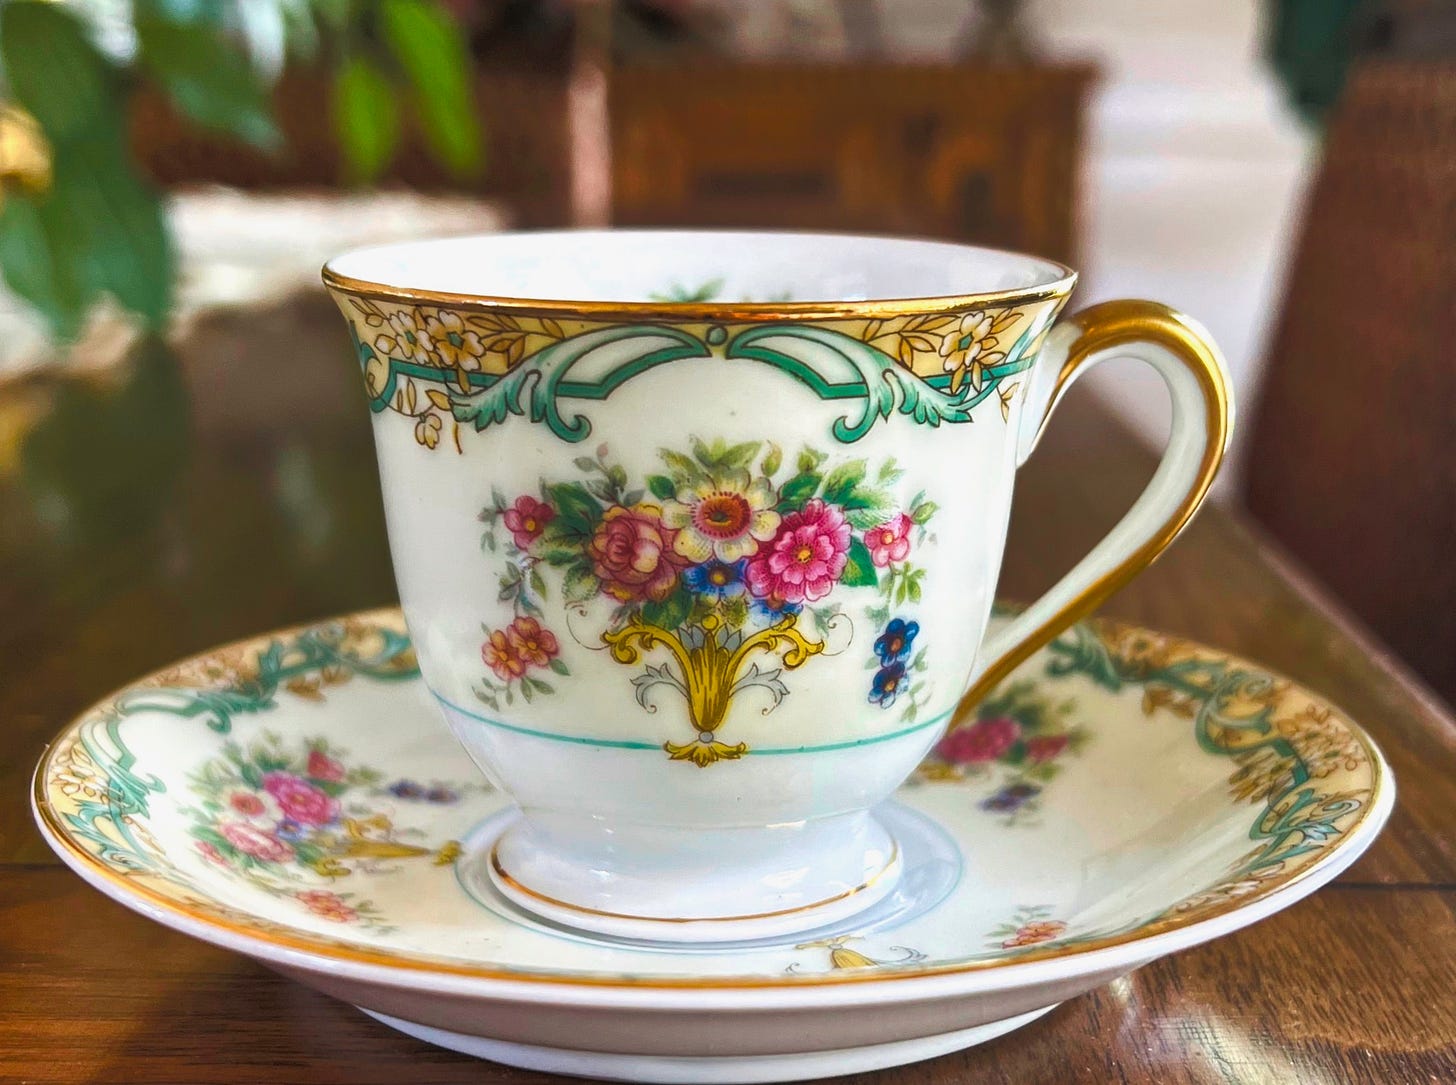 A gold-rimmed flowered demitasse tea cup and saucer 